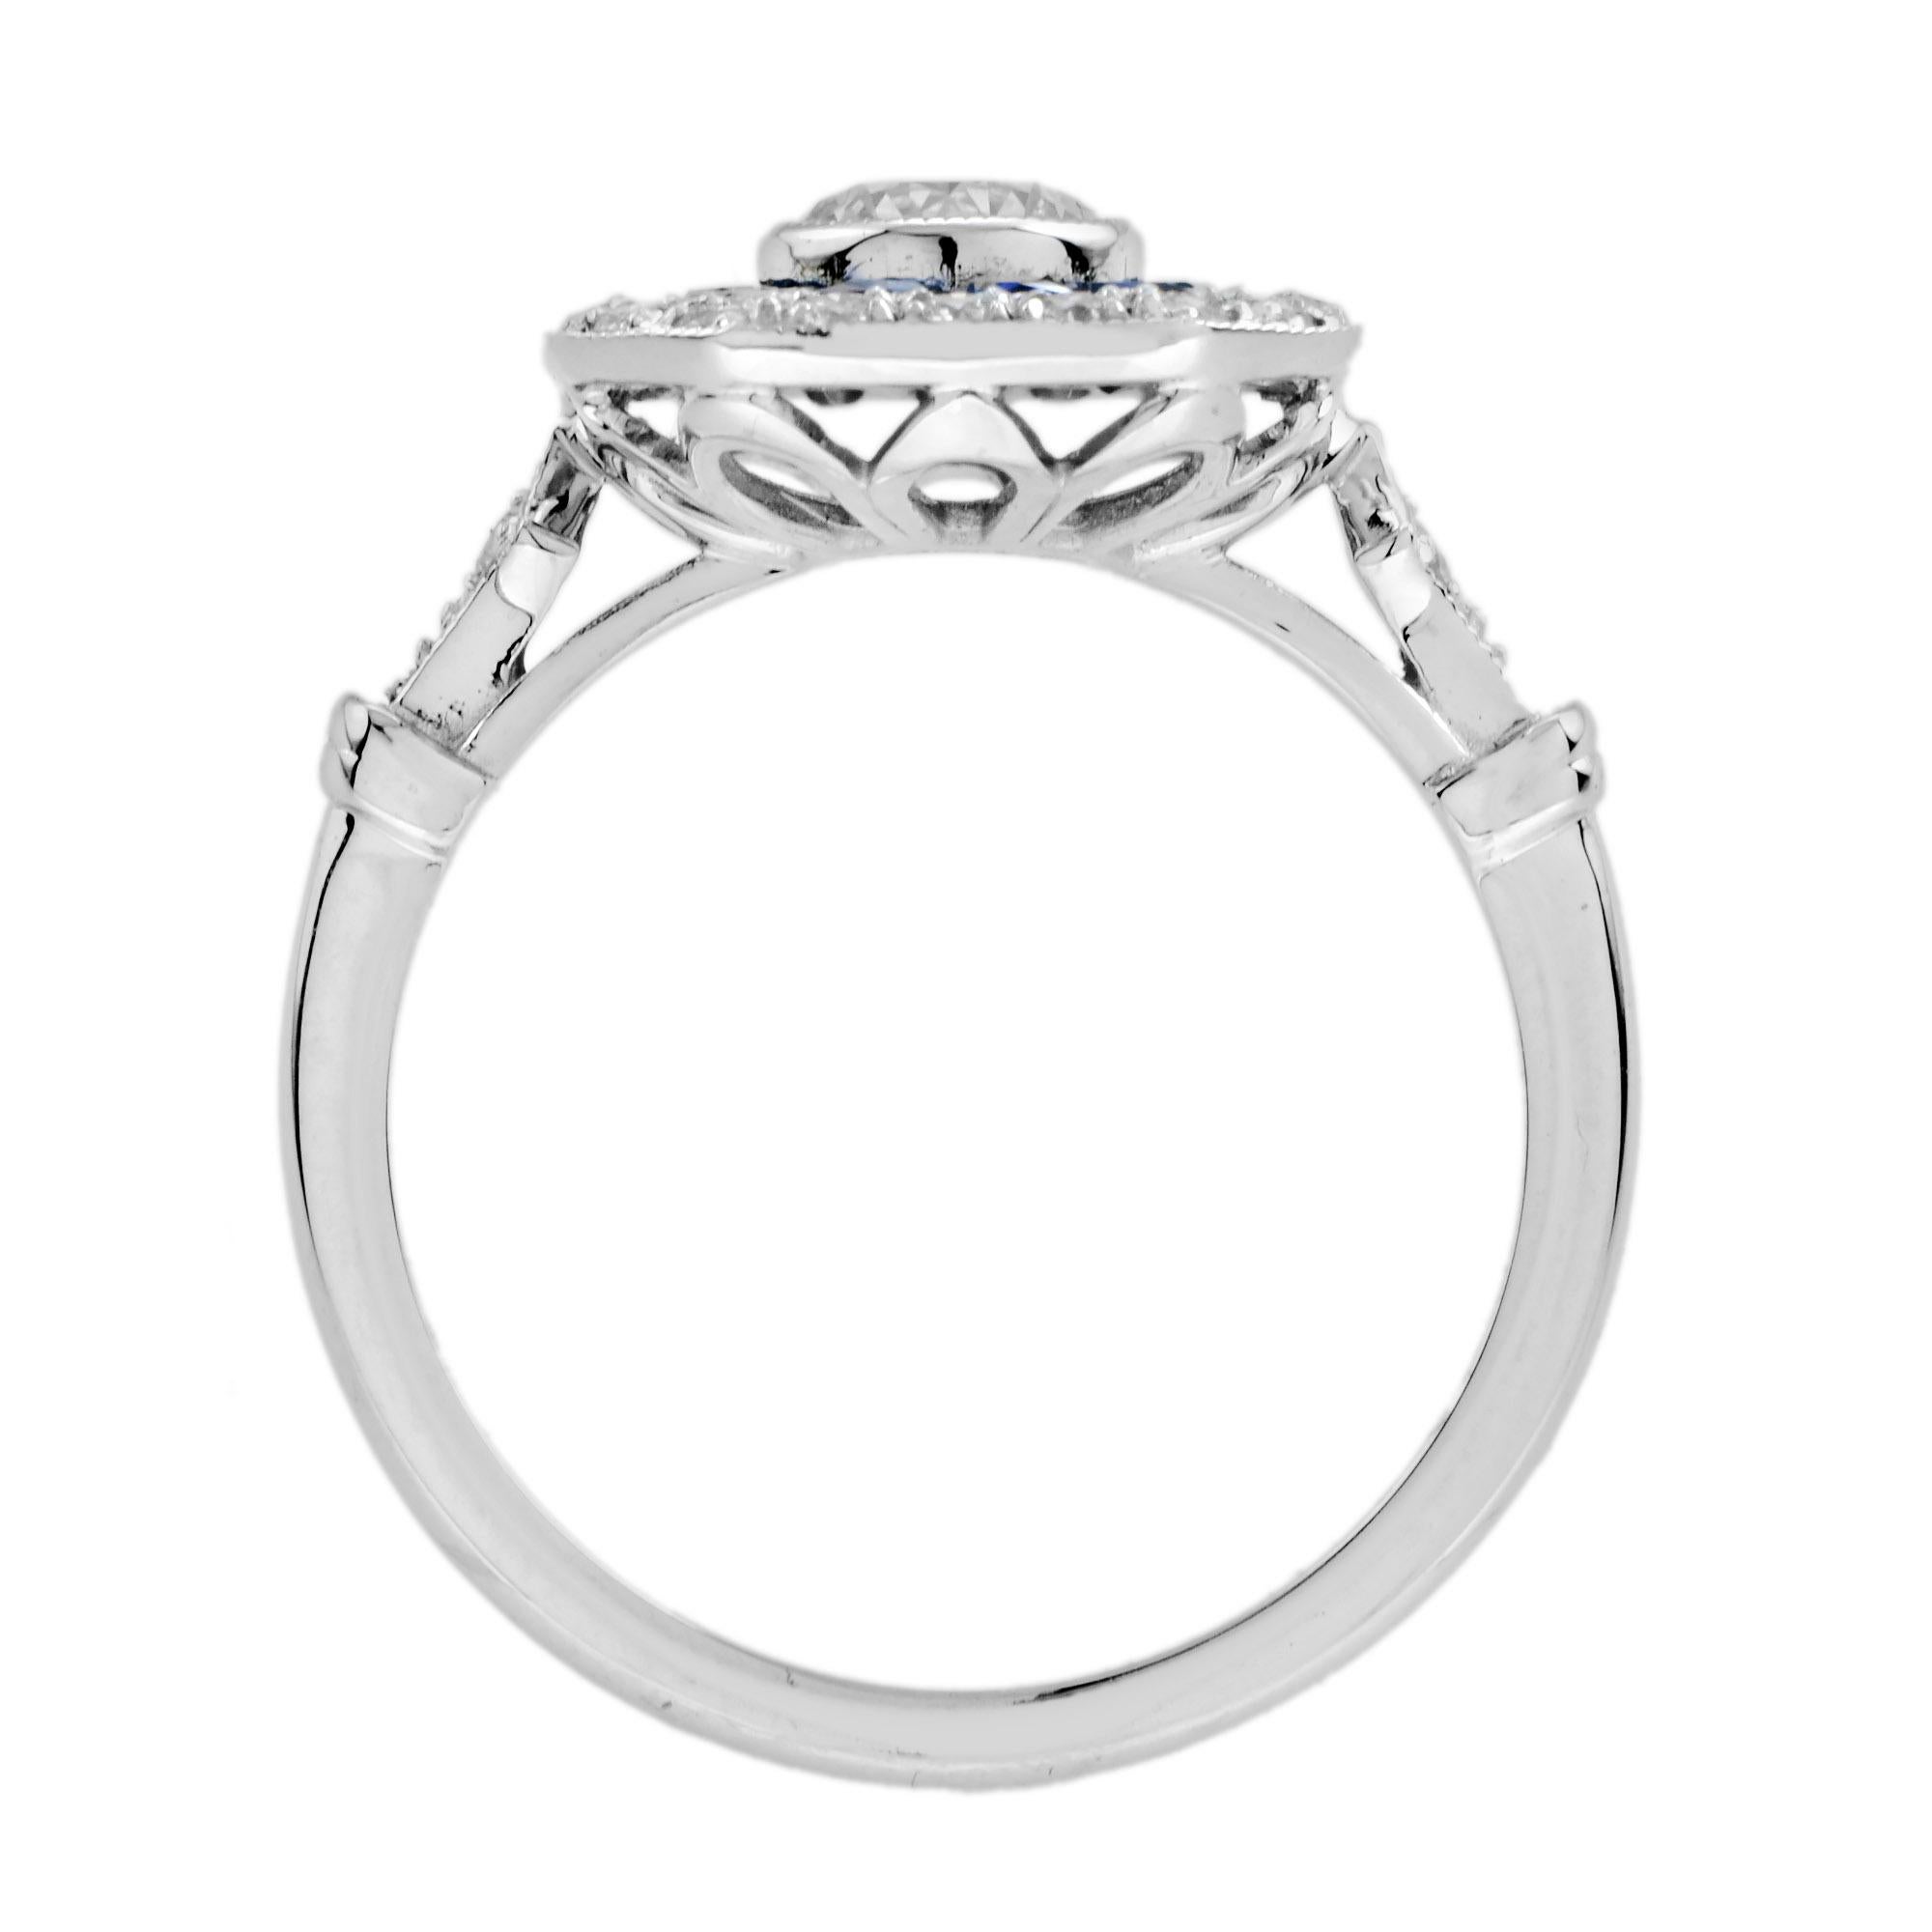 For Sale:  Diamond and Sapphire Art Deco Style Engagement Ring in 18k White Gold 7